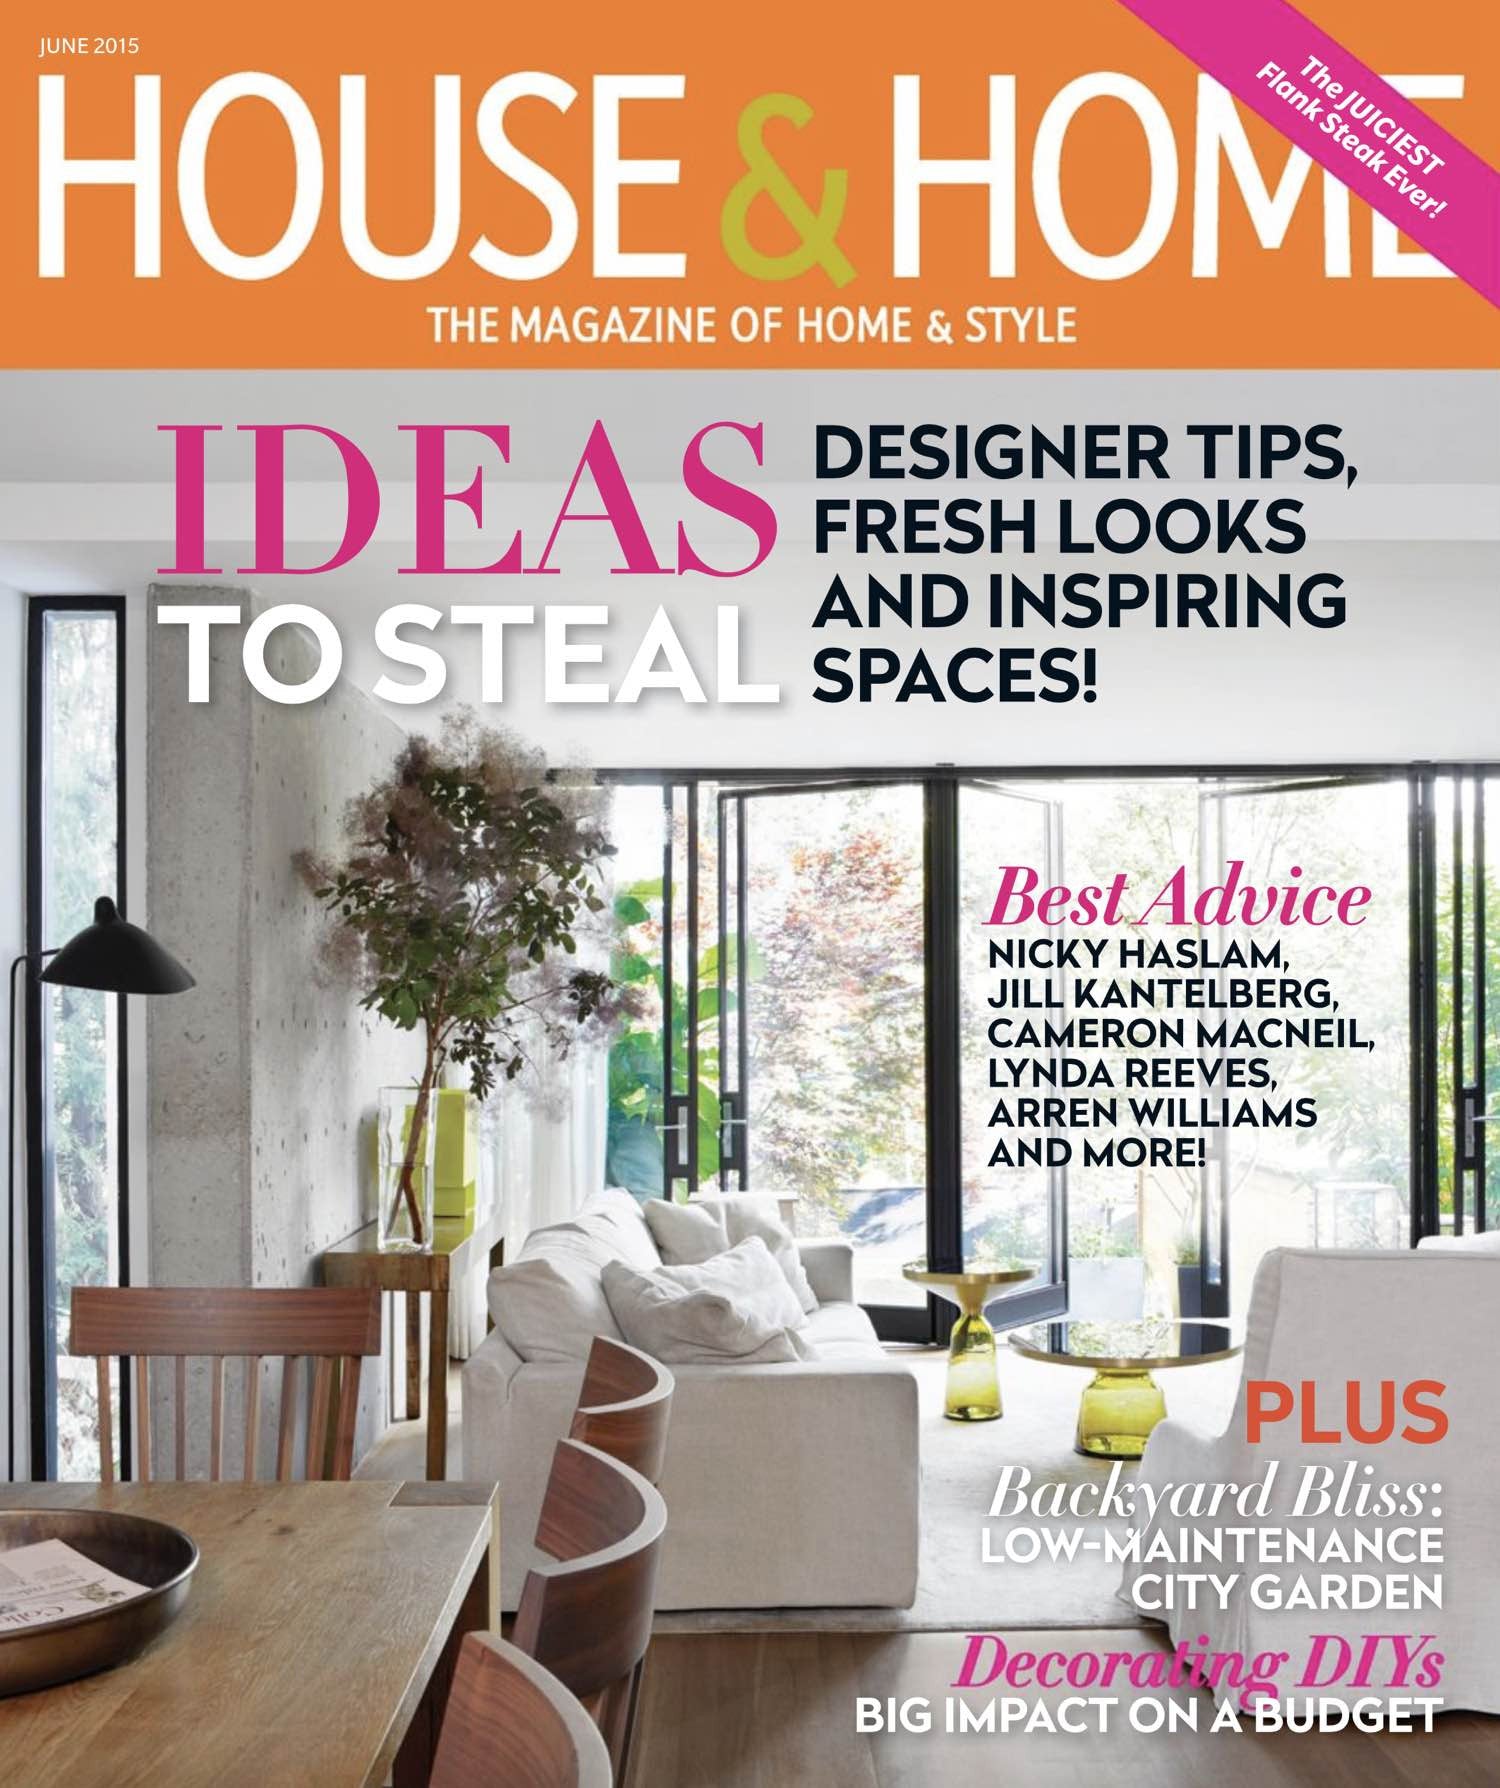 House & Home: June 2015